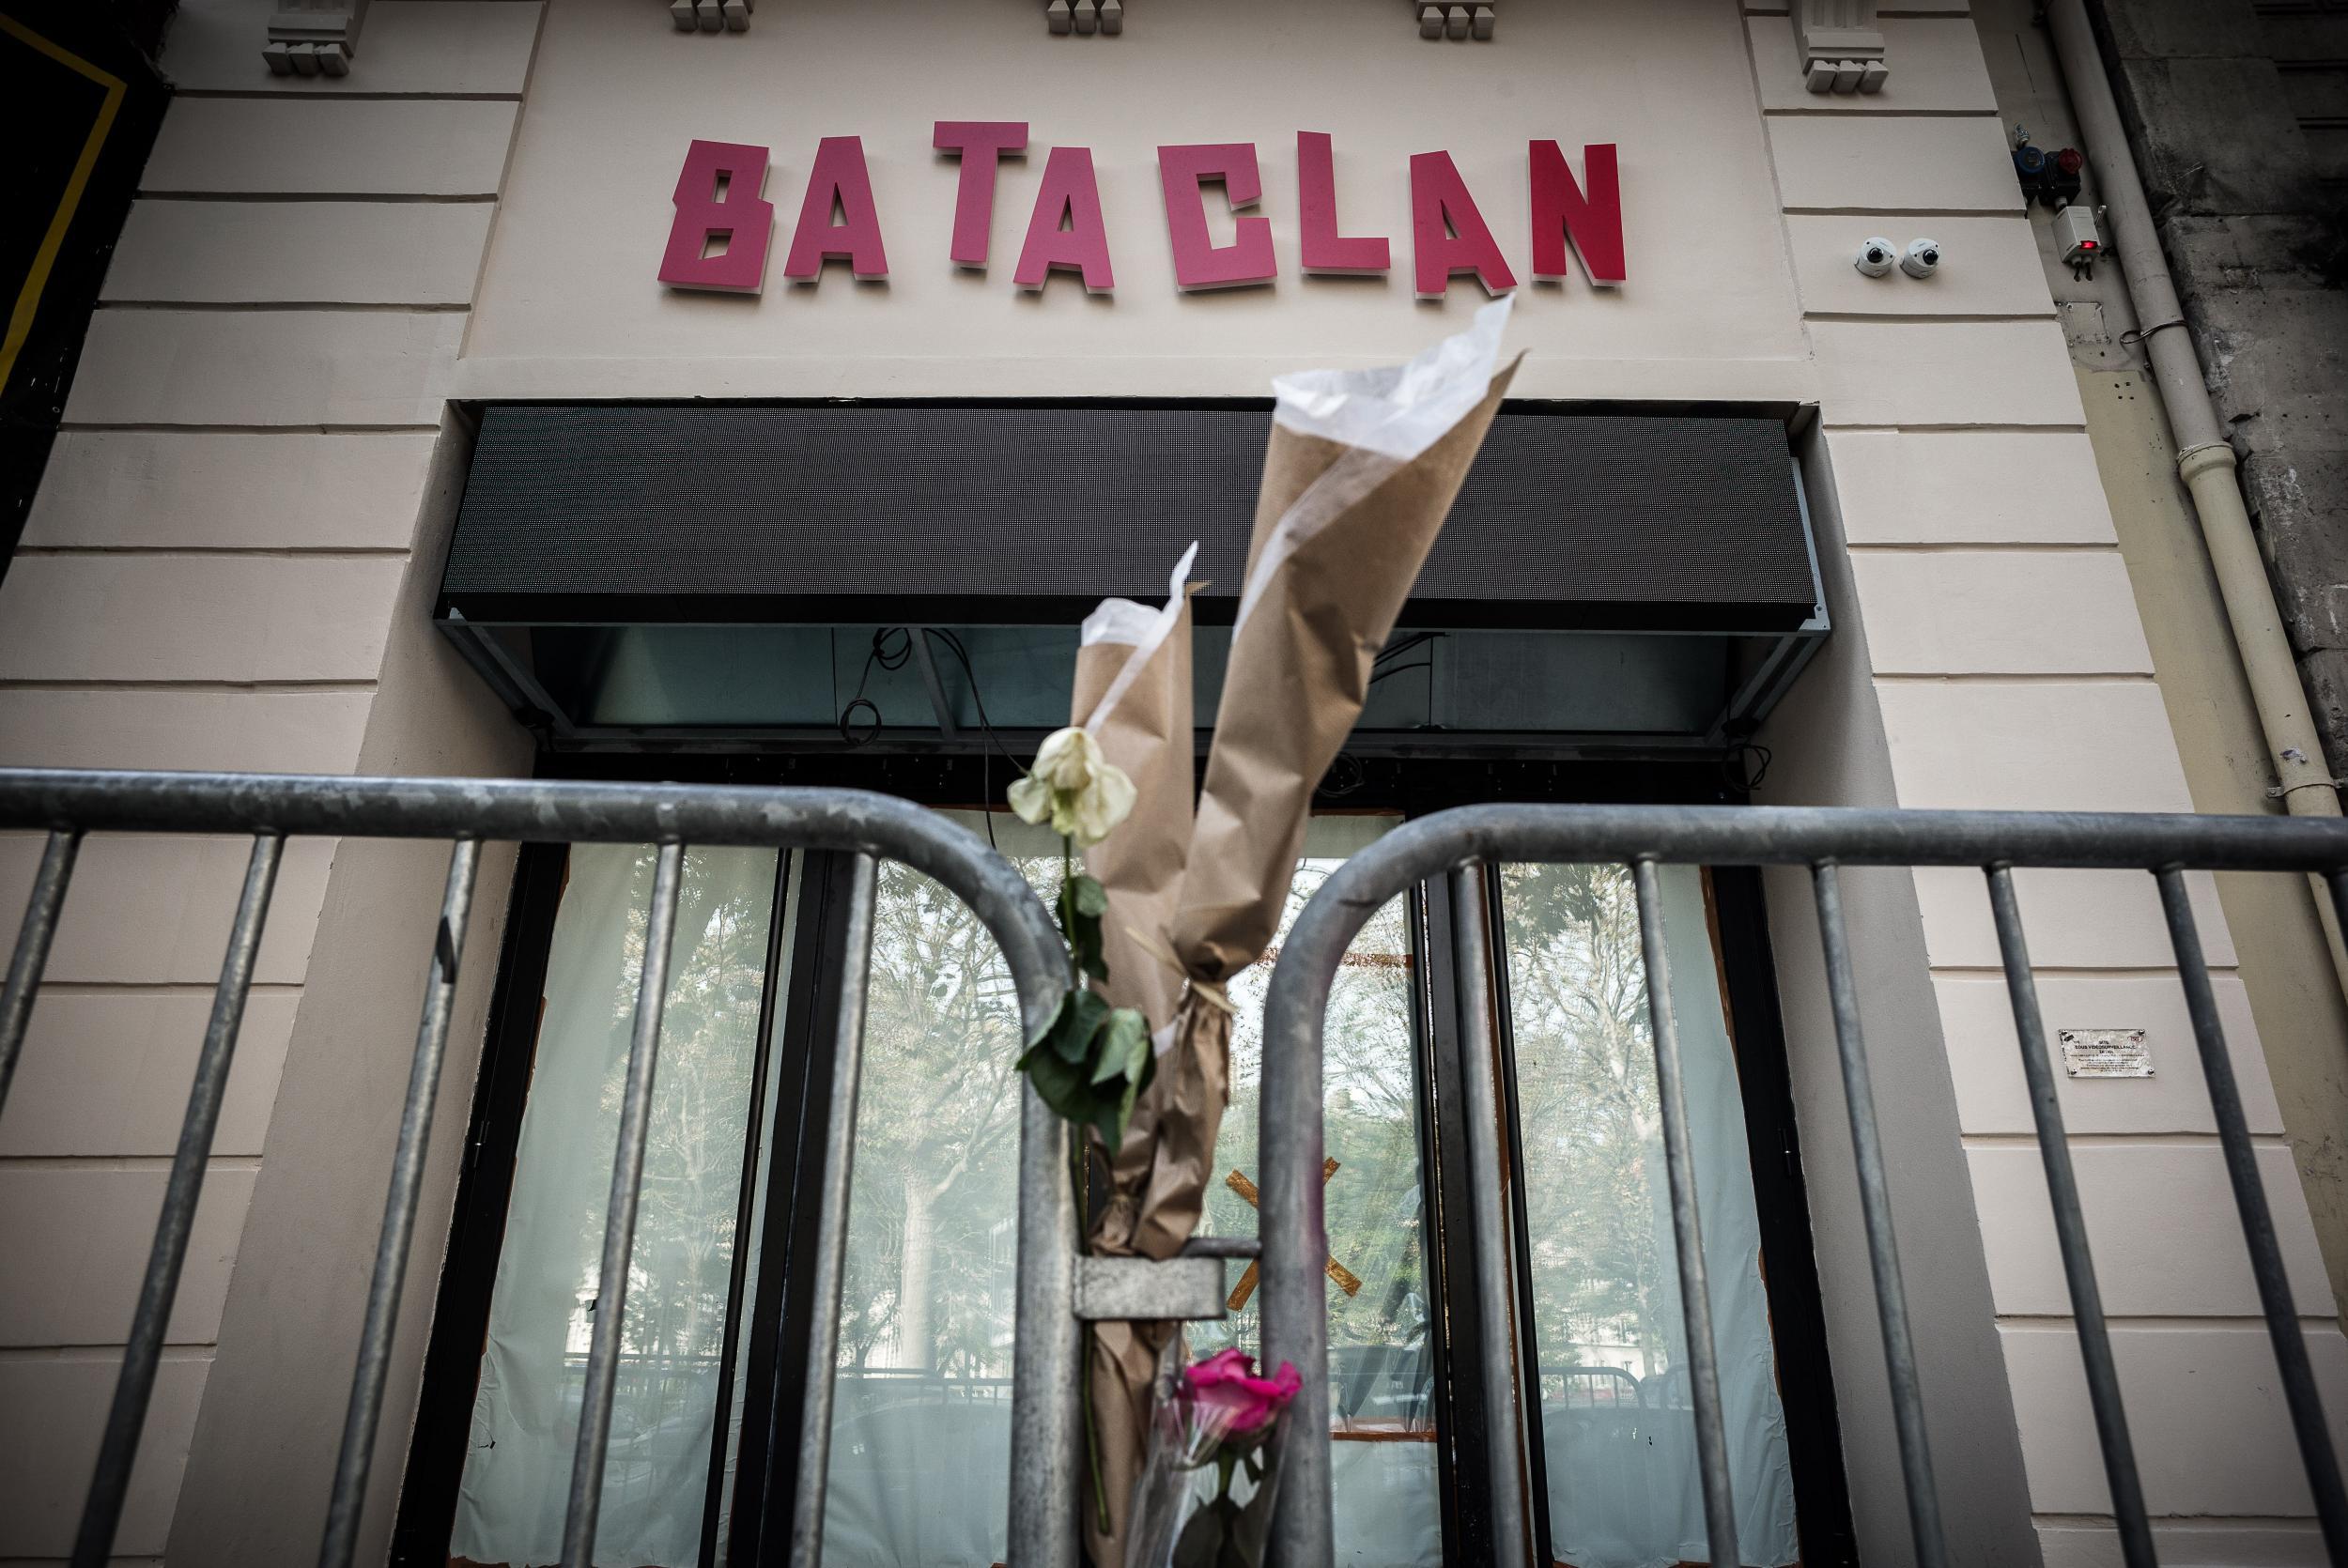 Flowers are tied to a fence outside the 'Bataclan' concert hall during All Saints' day in Paris on November 1, 2016, one of the targets of the November 13, 2015 terrorist attacks during which 130 people were killed and another 413 were wounded in the Fren